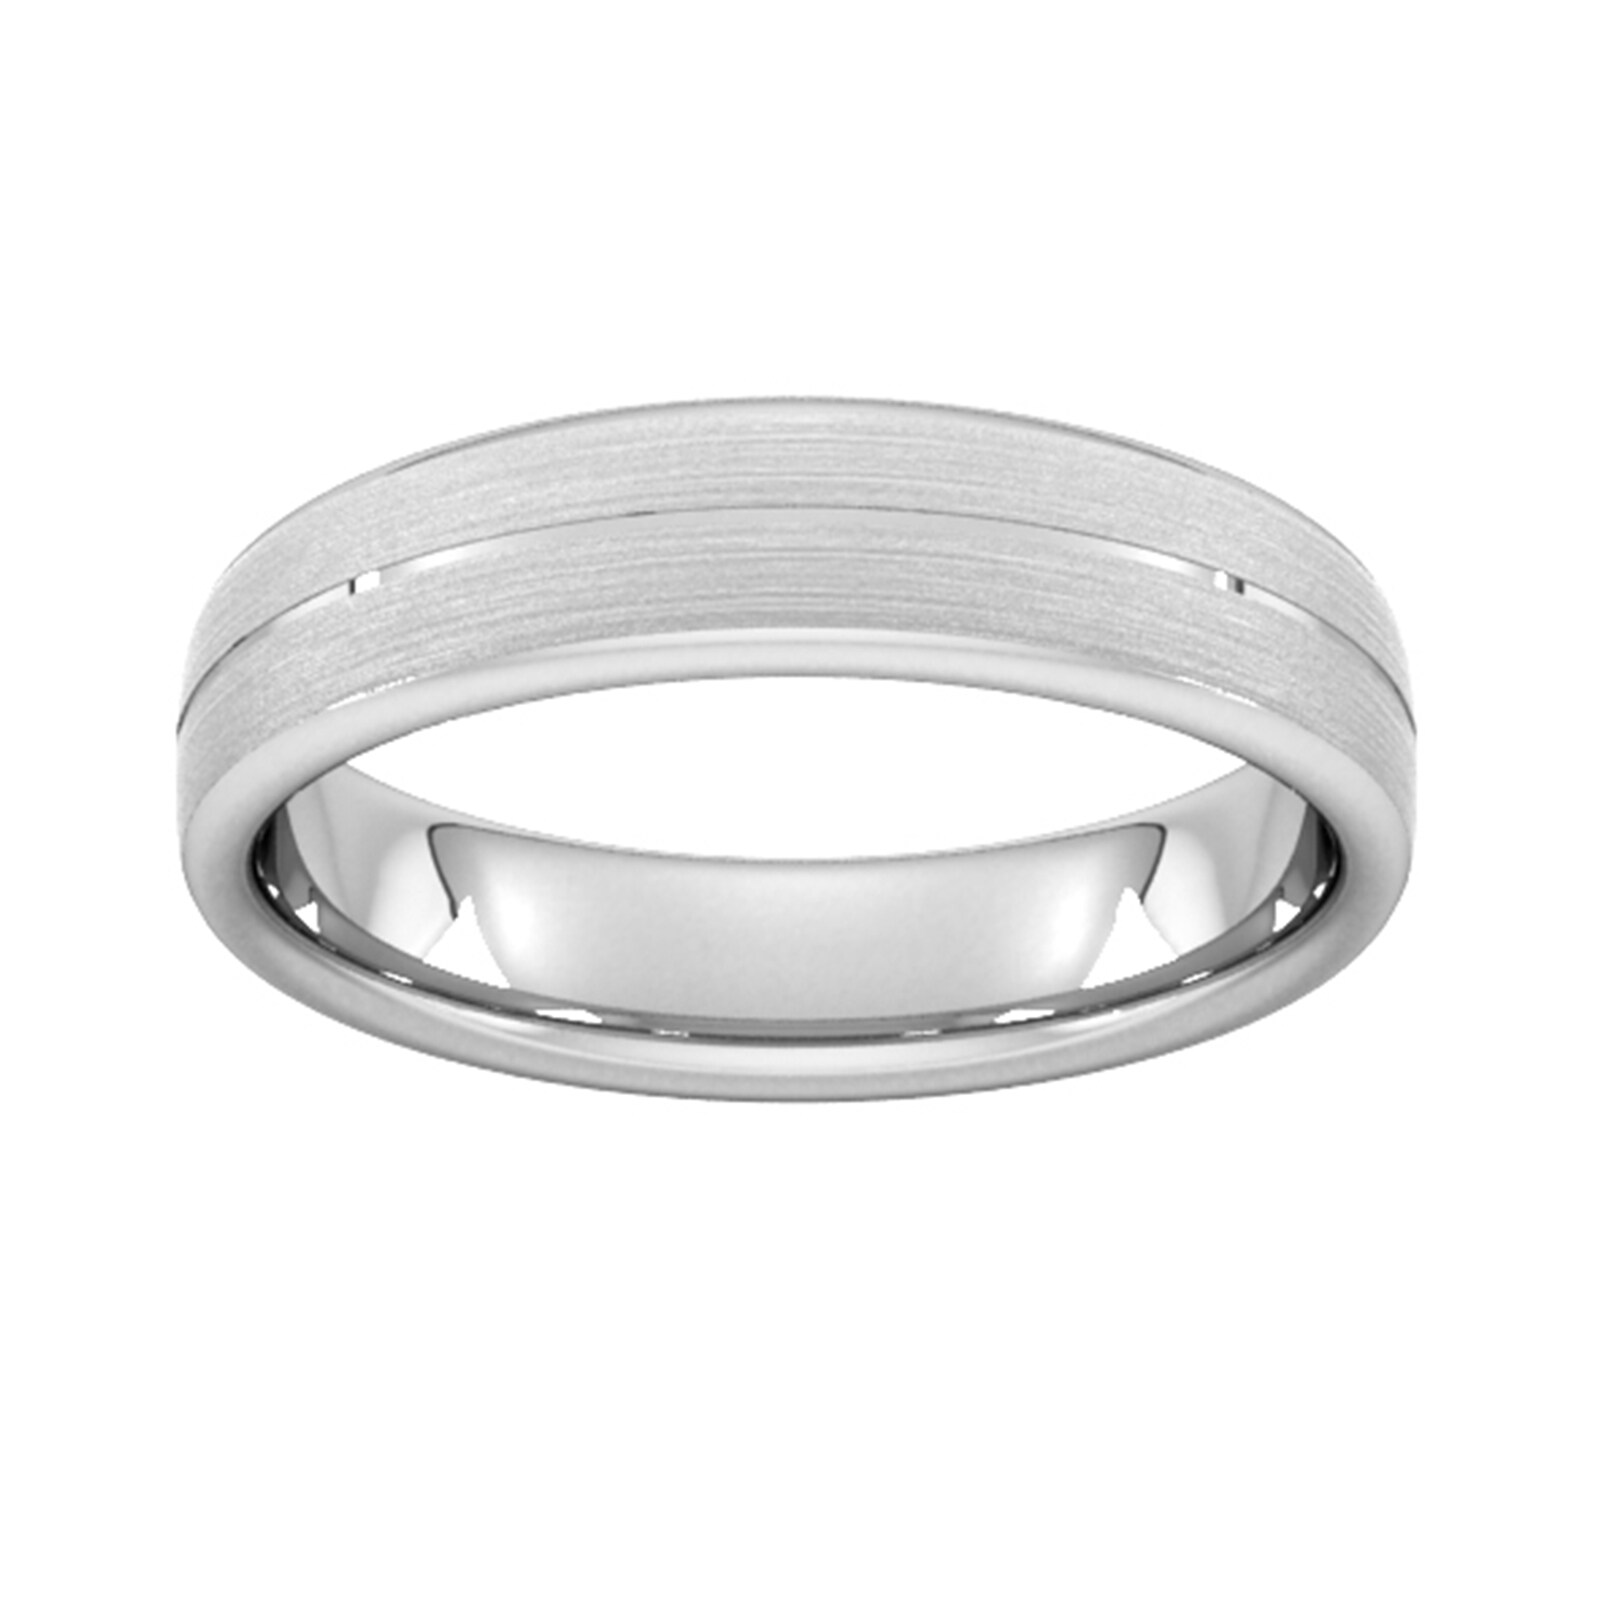 5mm D Shape Standard Centre Groove With Chamfered Edge Wedding Ring In Platinum - Ring Size Q